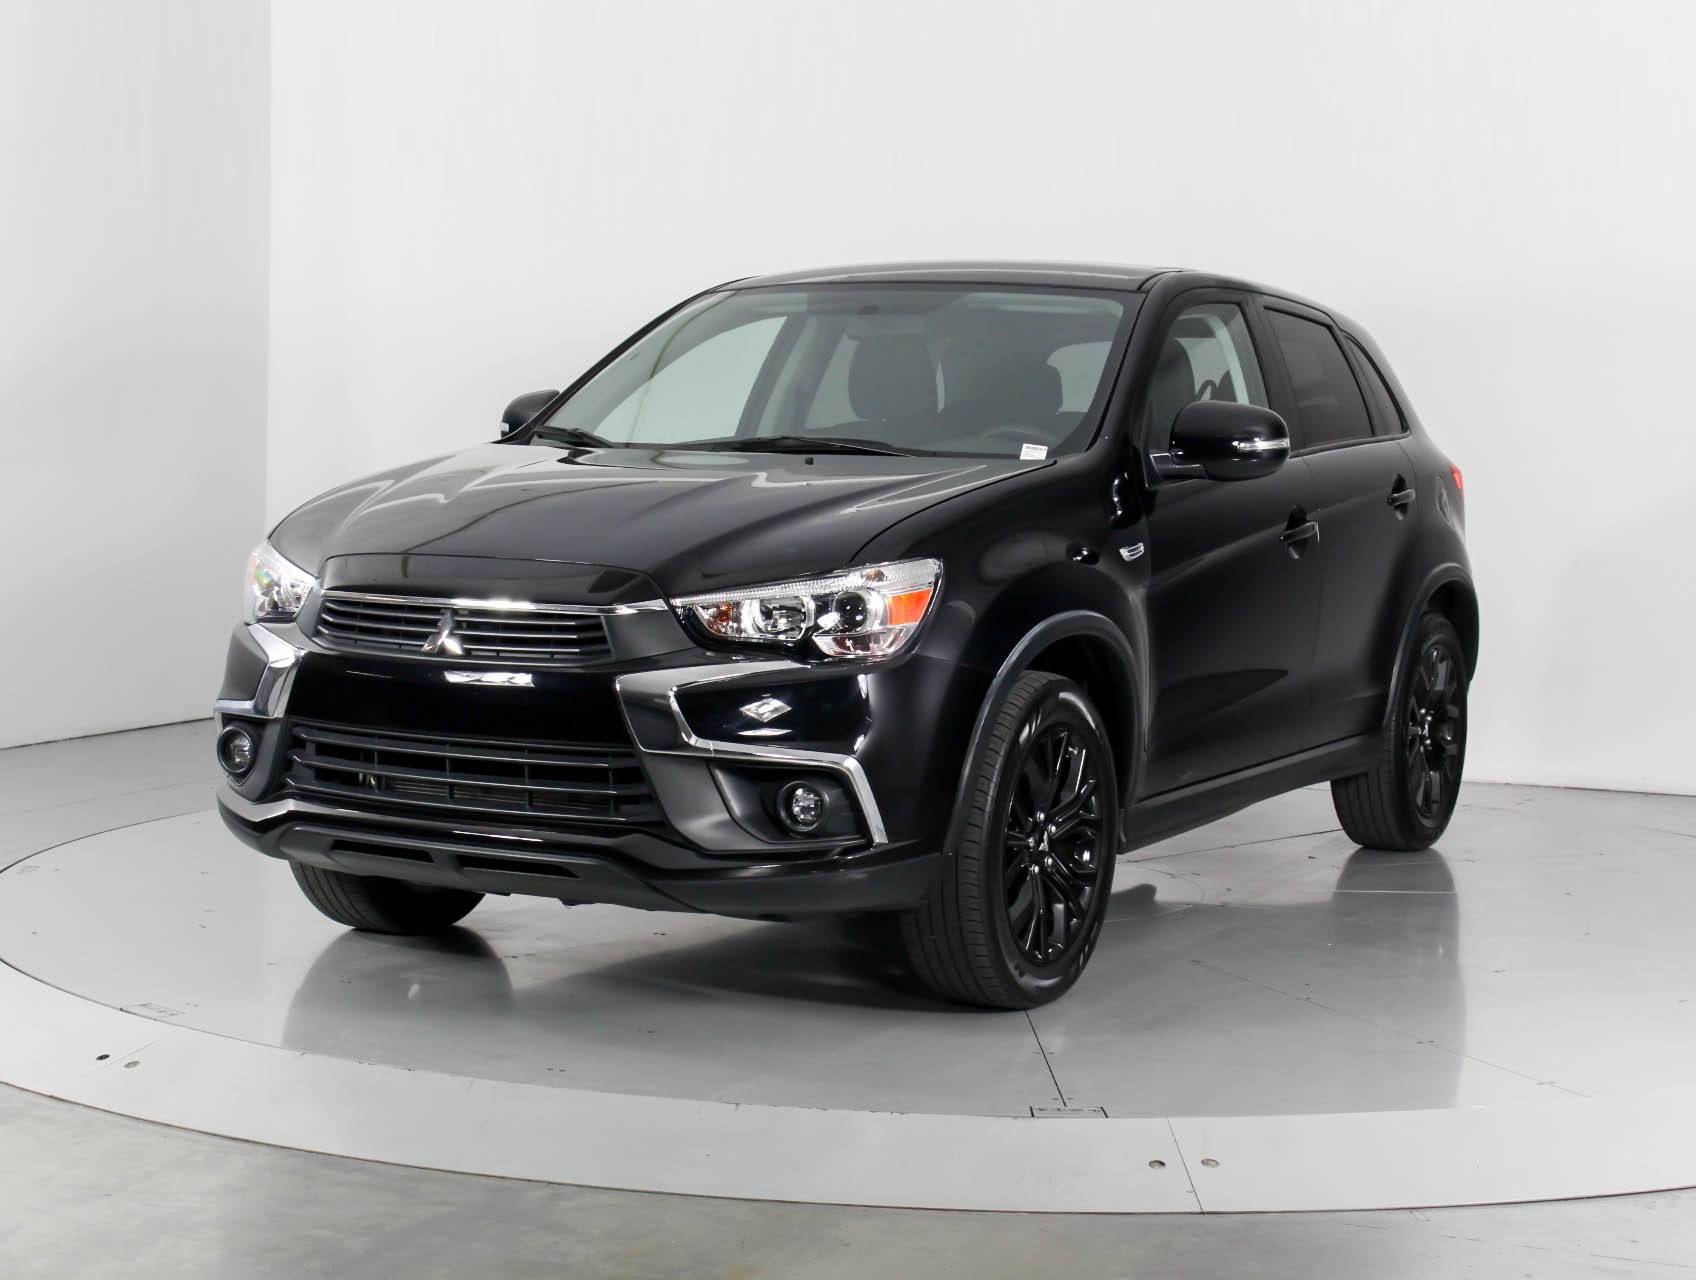 Used 2017 MITSUBISHI OUTLANDER SPORT ES for sale in WEST PALM | 101309